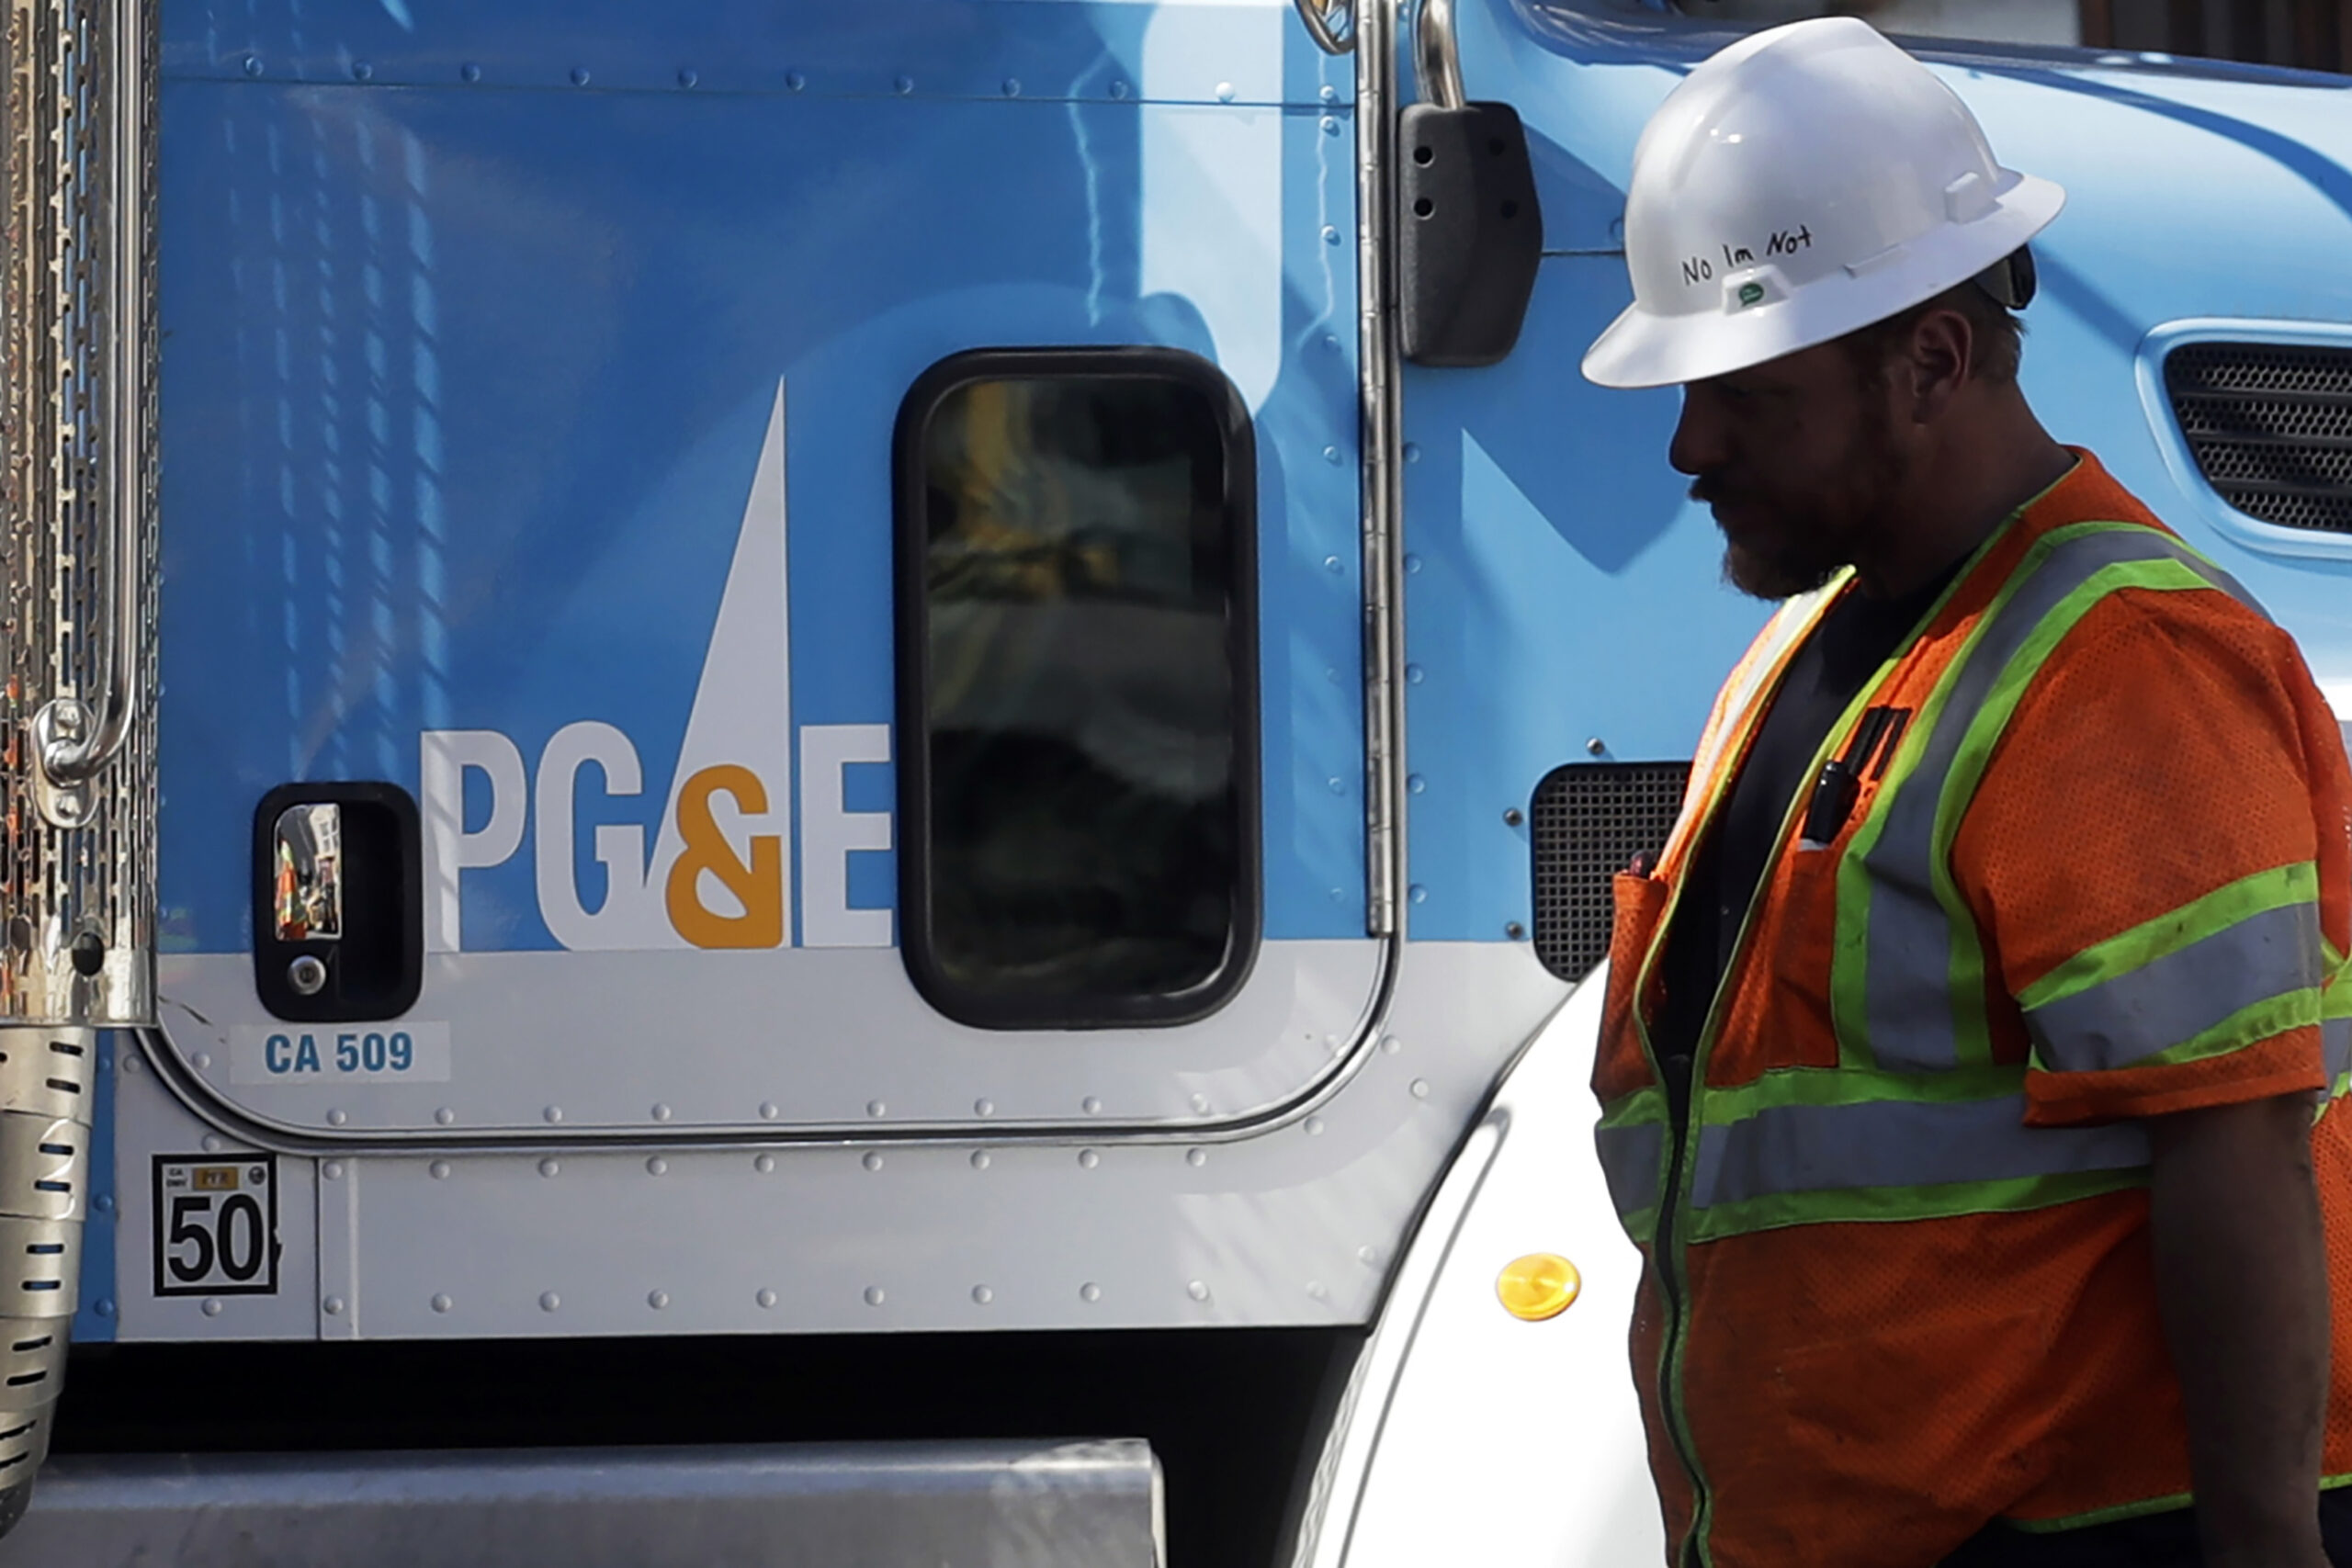 FILE - In this Aug. 15, 2019, file photo, a Pacific Gas & Electric worker walks in front of a truck in San Francisco. Pacific Gas & Electric has agreed to pay more than $55 million to avoid criminal prosecution for two major wildfires started by its aging equipment in 2019 and 2021, prosecutors announced. (AP Photo/Jeff Chiu, File)